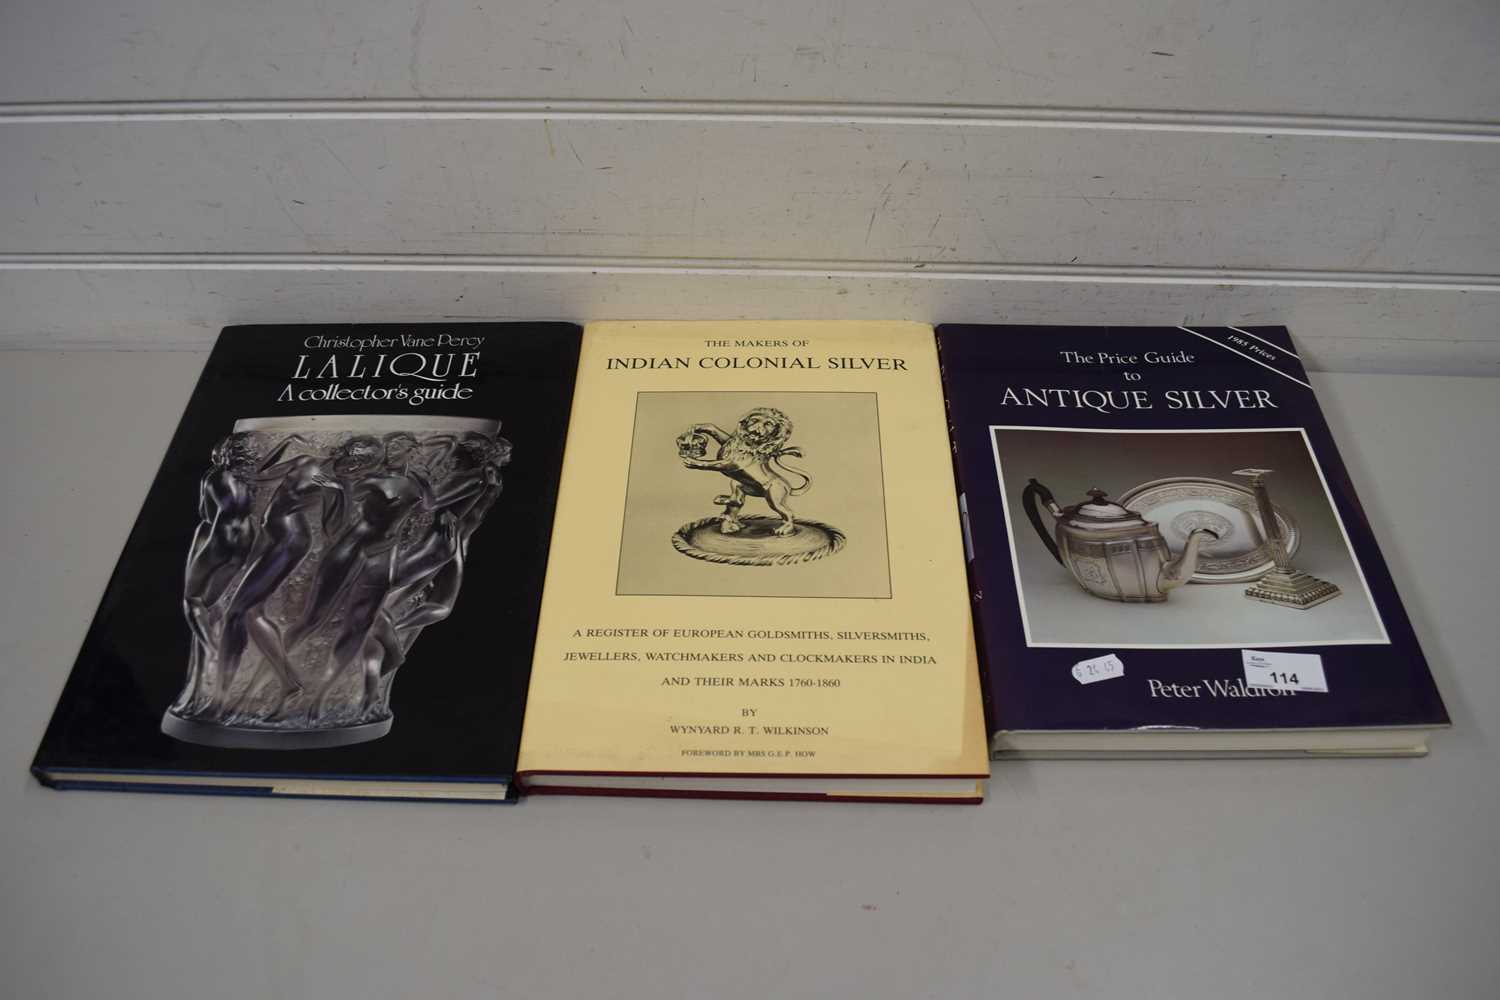 ANTIQUES REFERENCE BOOKS TO INCLUDE CHRISTOPHER VANE PERCY 'LALIQUE, A COLLECTORS GUIDE', PETER